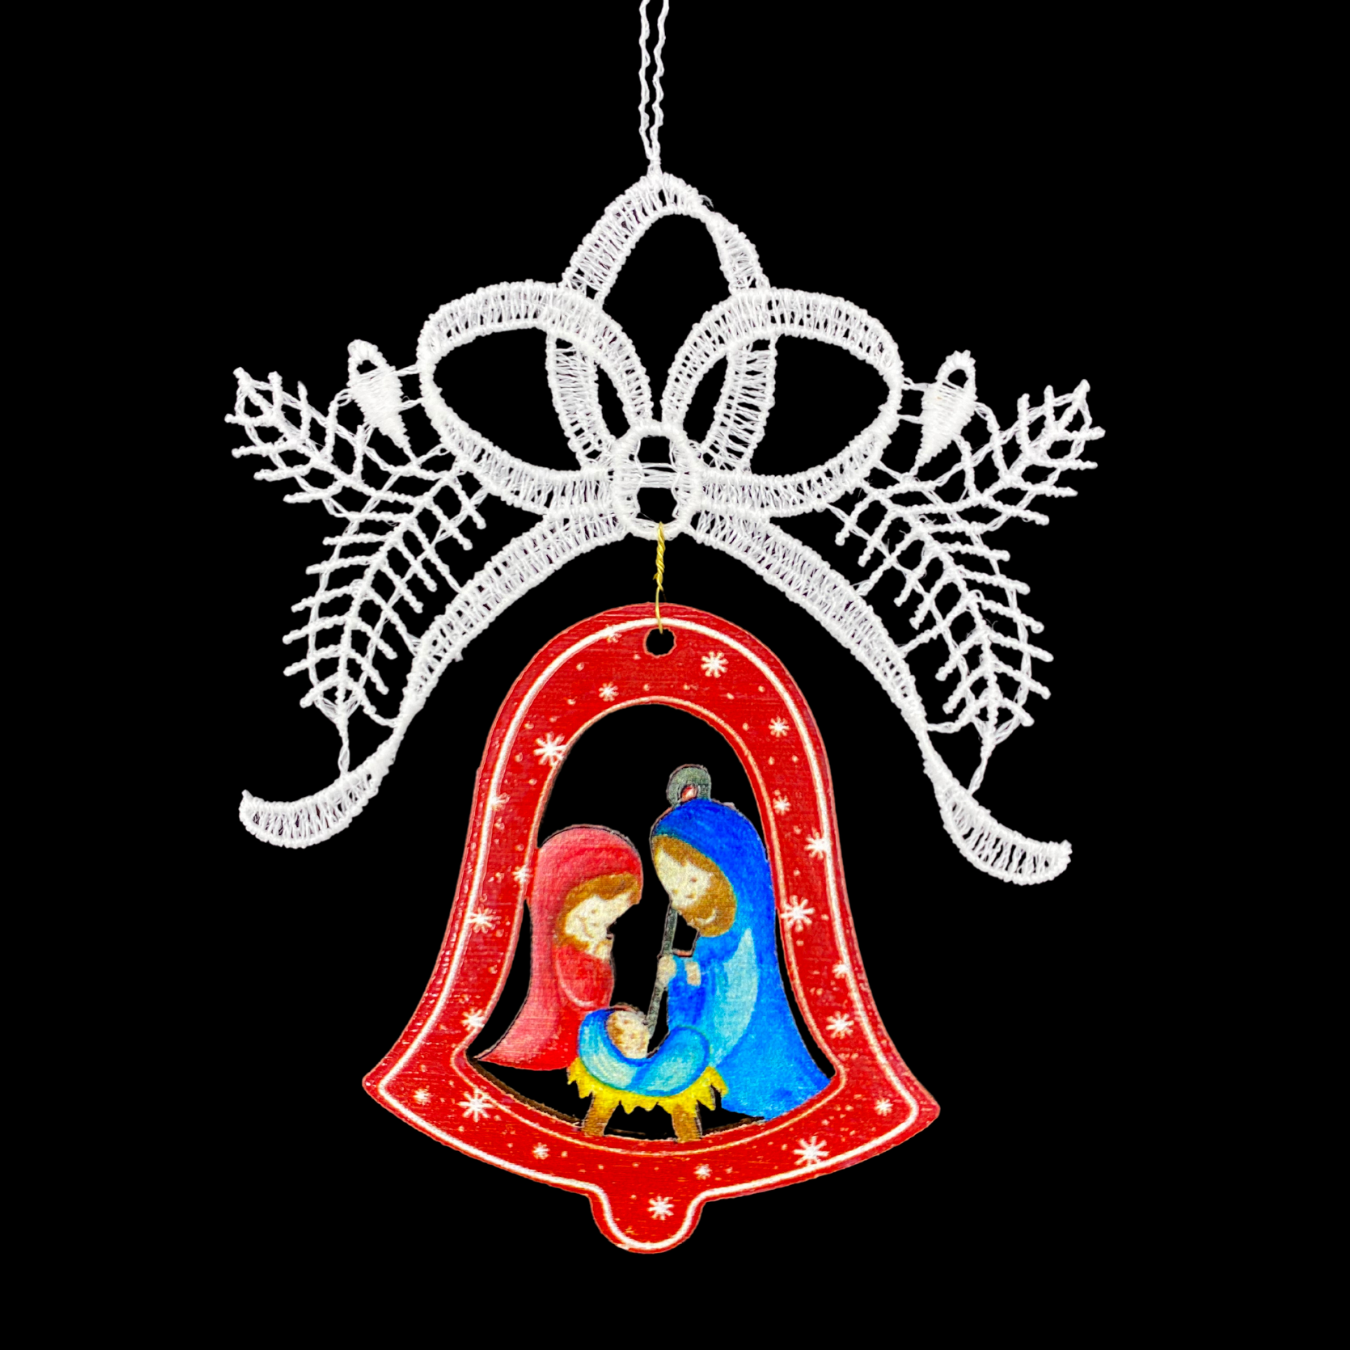 Lace Ornament with Wooden Holy Family Bell by StiVoTex Vogel